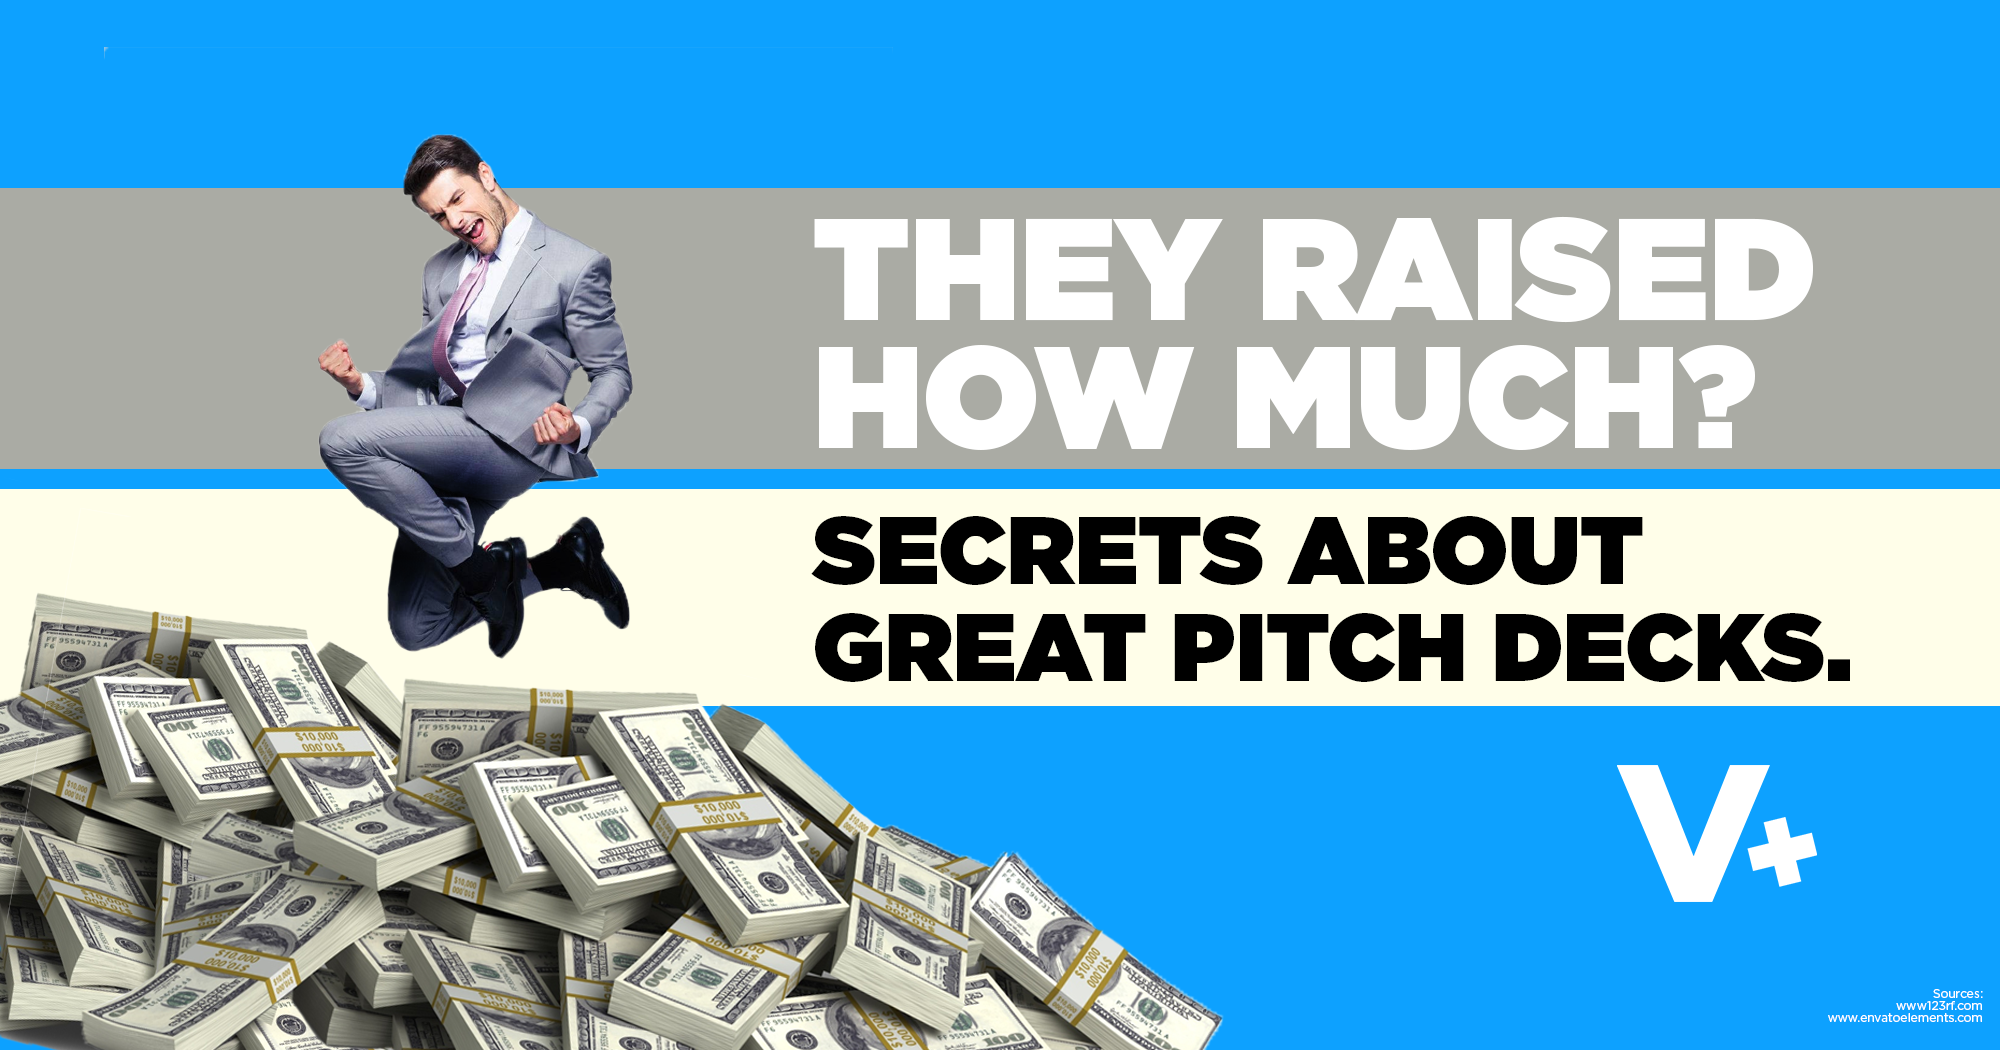 They Raised How Much? Secrets About Great Pitch Decks